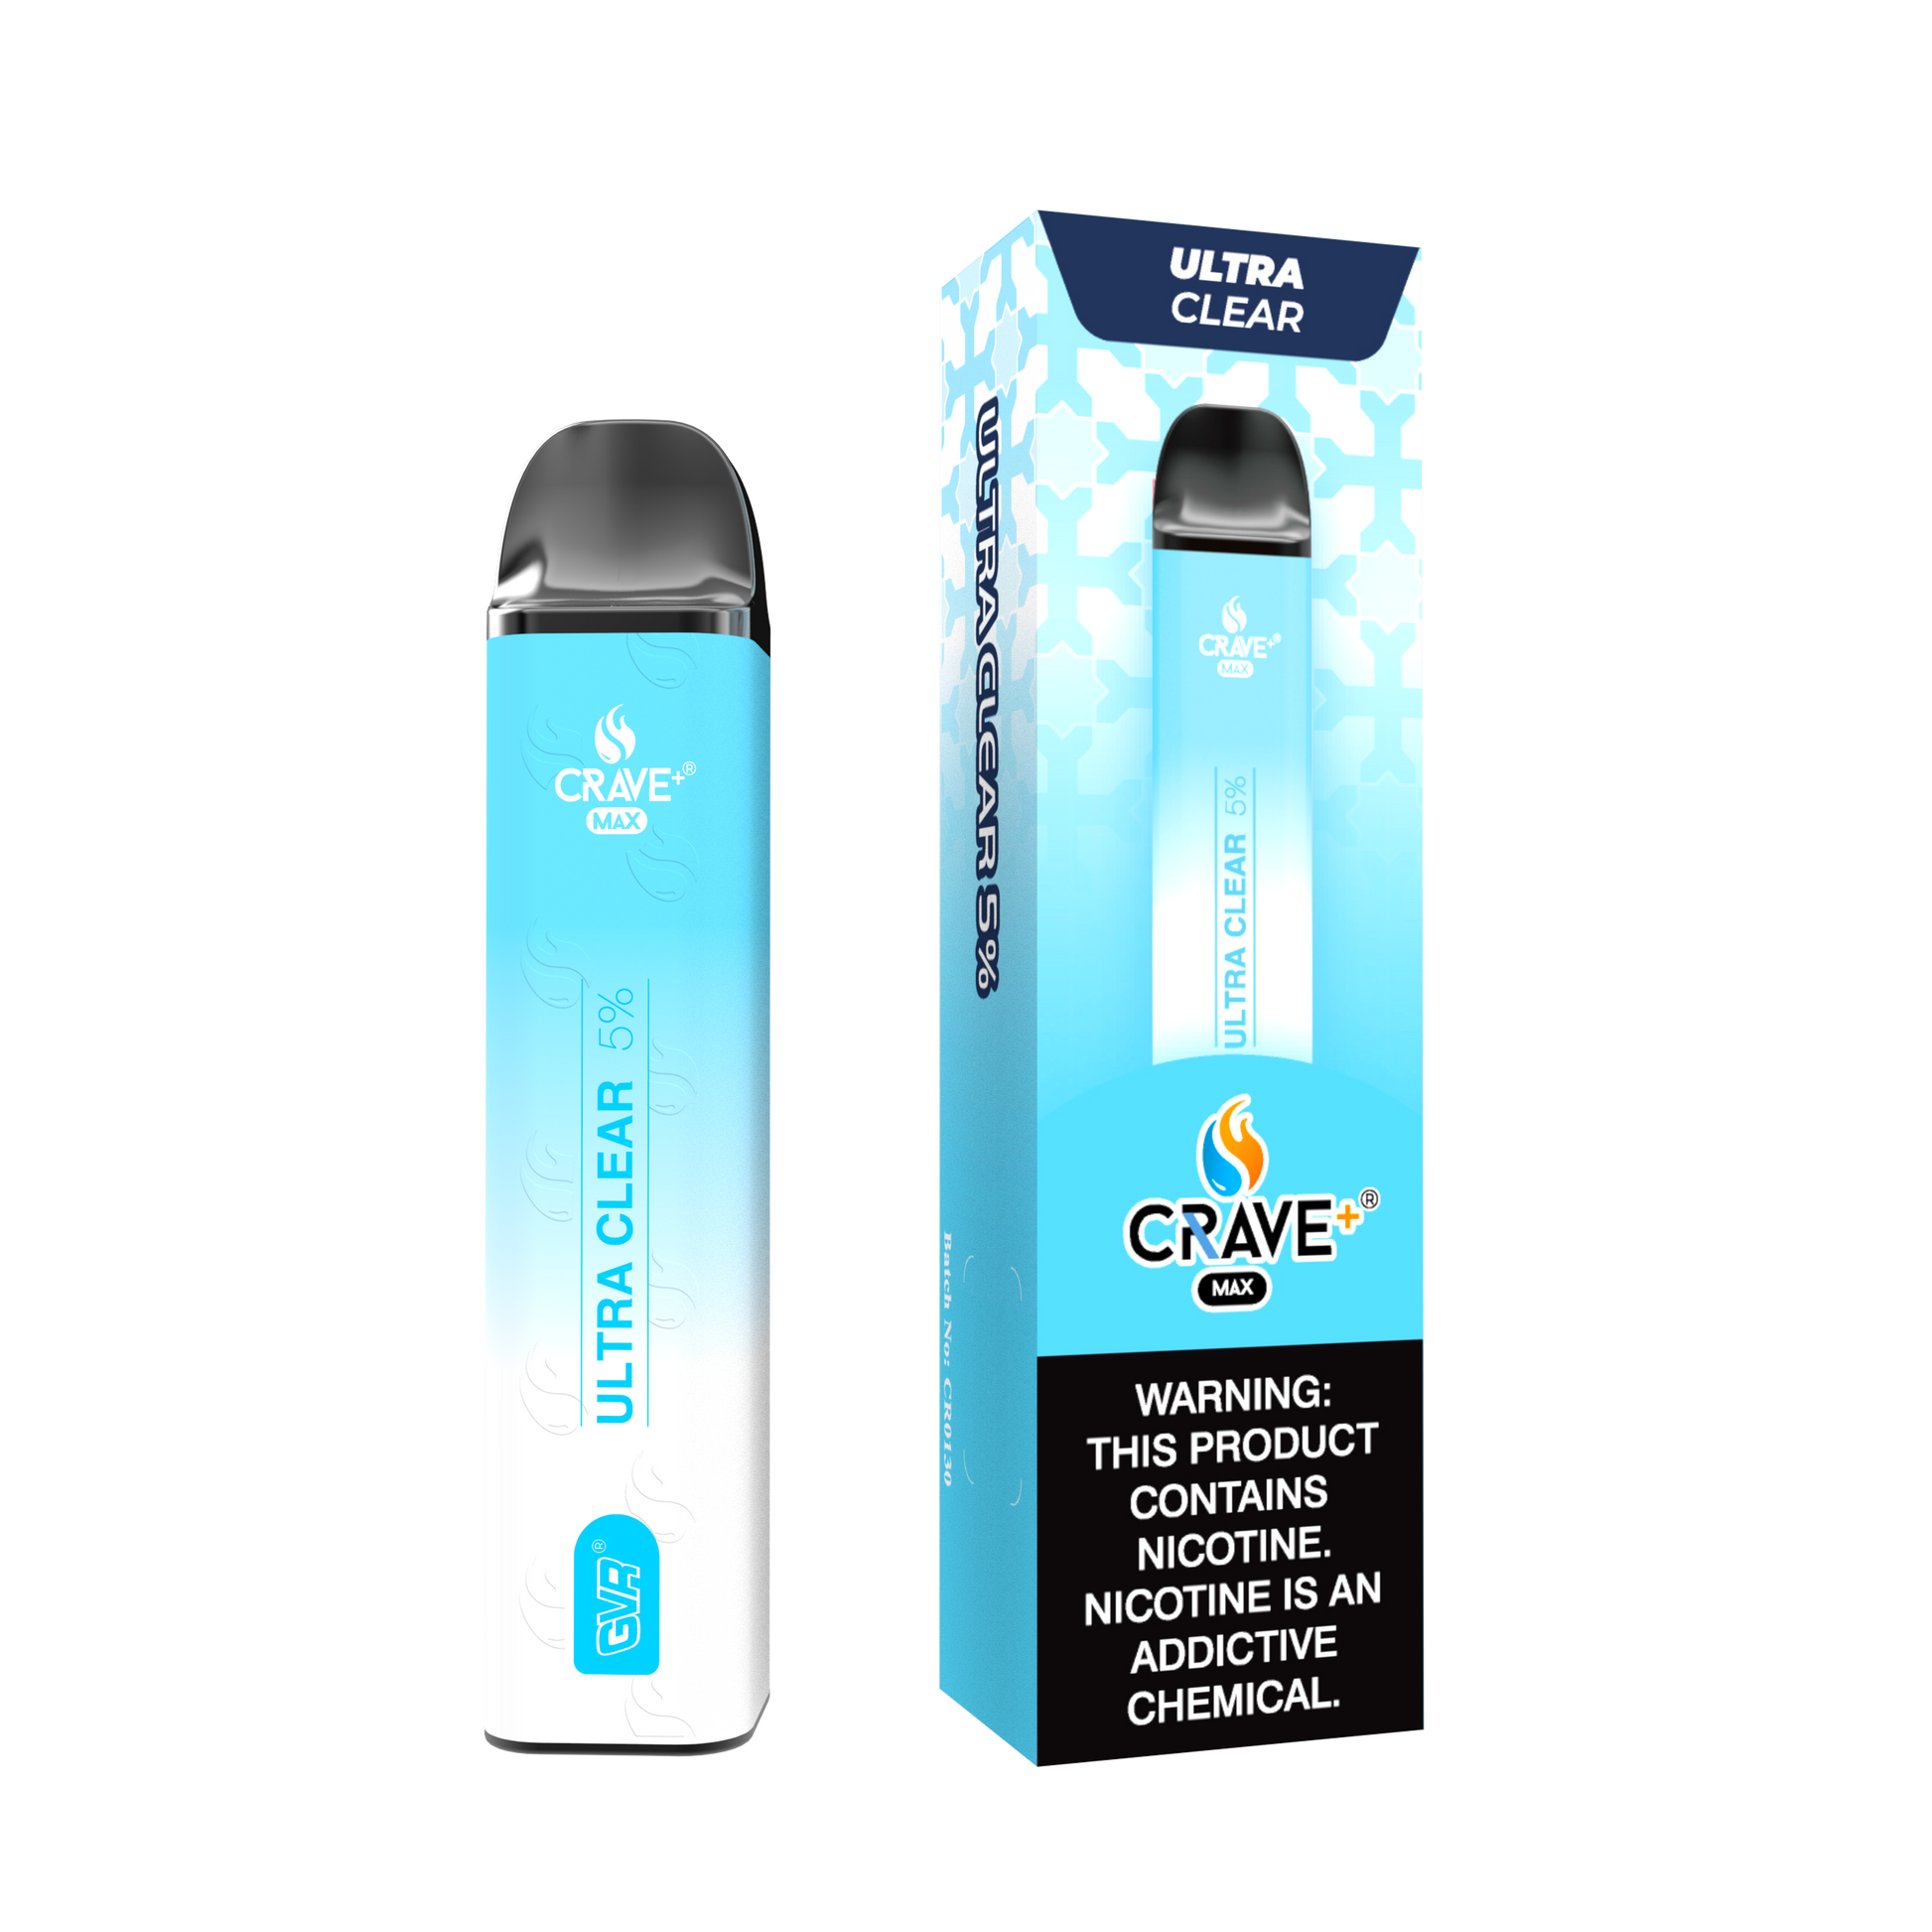 crave max, crave vape, buy crave max, crave max for sale, crave max flavors, crave flavors vape, buy crave vape online, crave max gvr, crave 2500 puffs, crave clear, crave max clear, crave clear 3%, crave clear 5%, crave max 3%, crave max 5%, crave 3%, crave 5%, crave vape clear, vape clear flavor, crave flavor clear, crave max kik, crave max limited edition, crave new clear, crave max new clear, crave max kik, crave max kalibloom clear, crave max ultra clear, crave plus vape, best disposable vape 2023